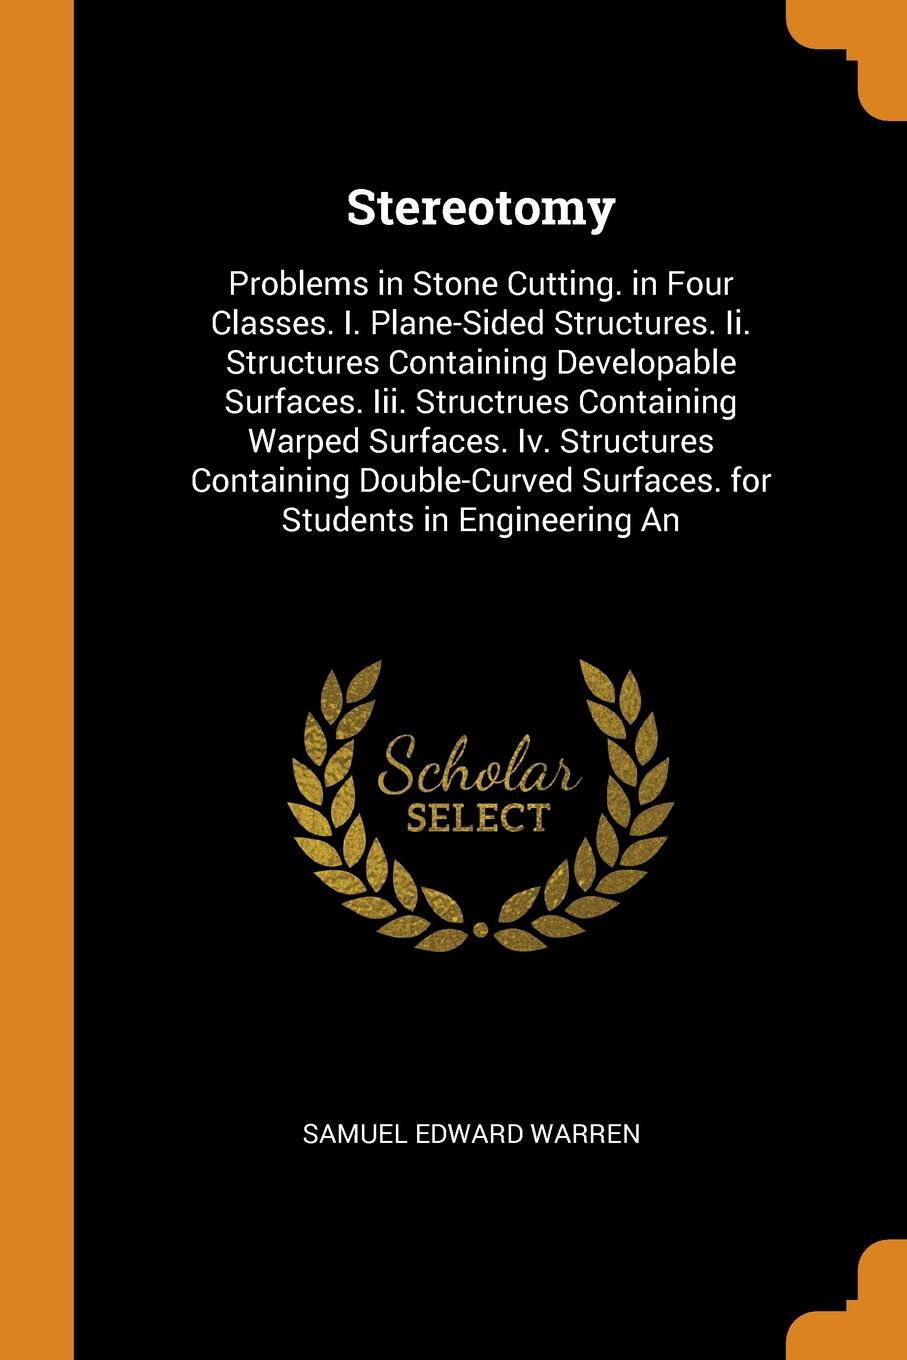 Stereotomy. Problems in Stone Cutting. in Four Classes. I. Plane-Sided Structures. Ii. Structures Containing Developable Surfaces. Iii. Structrues Containing Warped Surfaces. Iv. Structures Containing Double-Curved Surfaces. for Students in Engine...